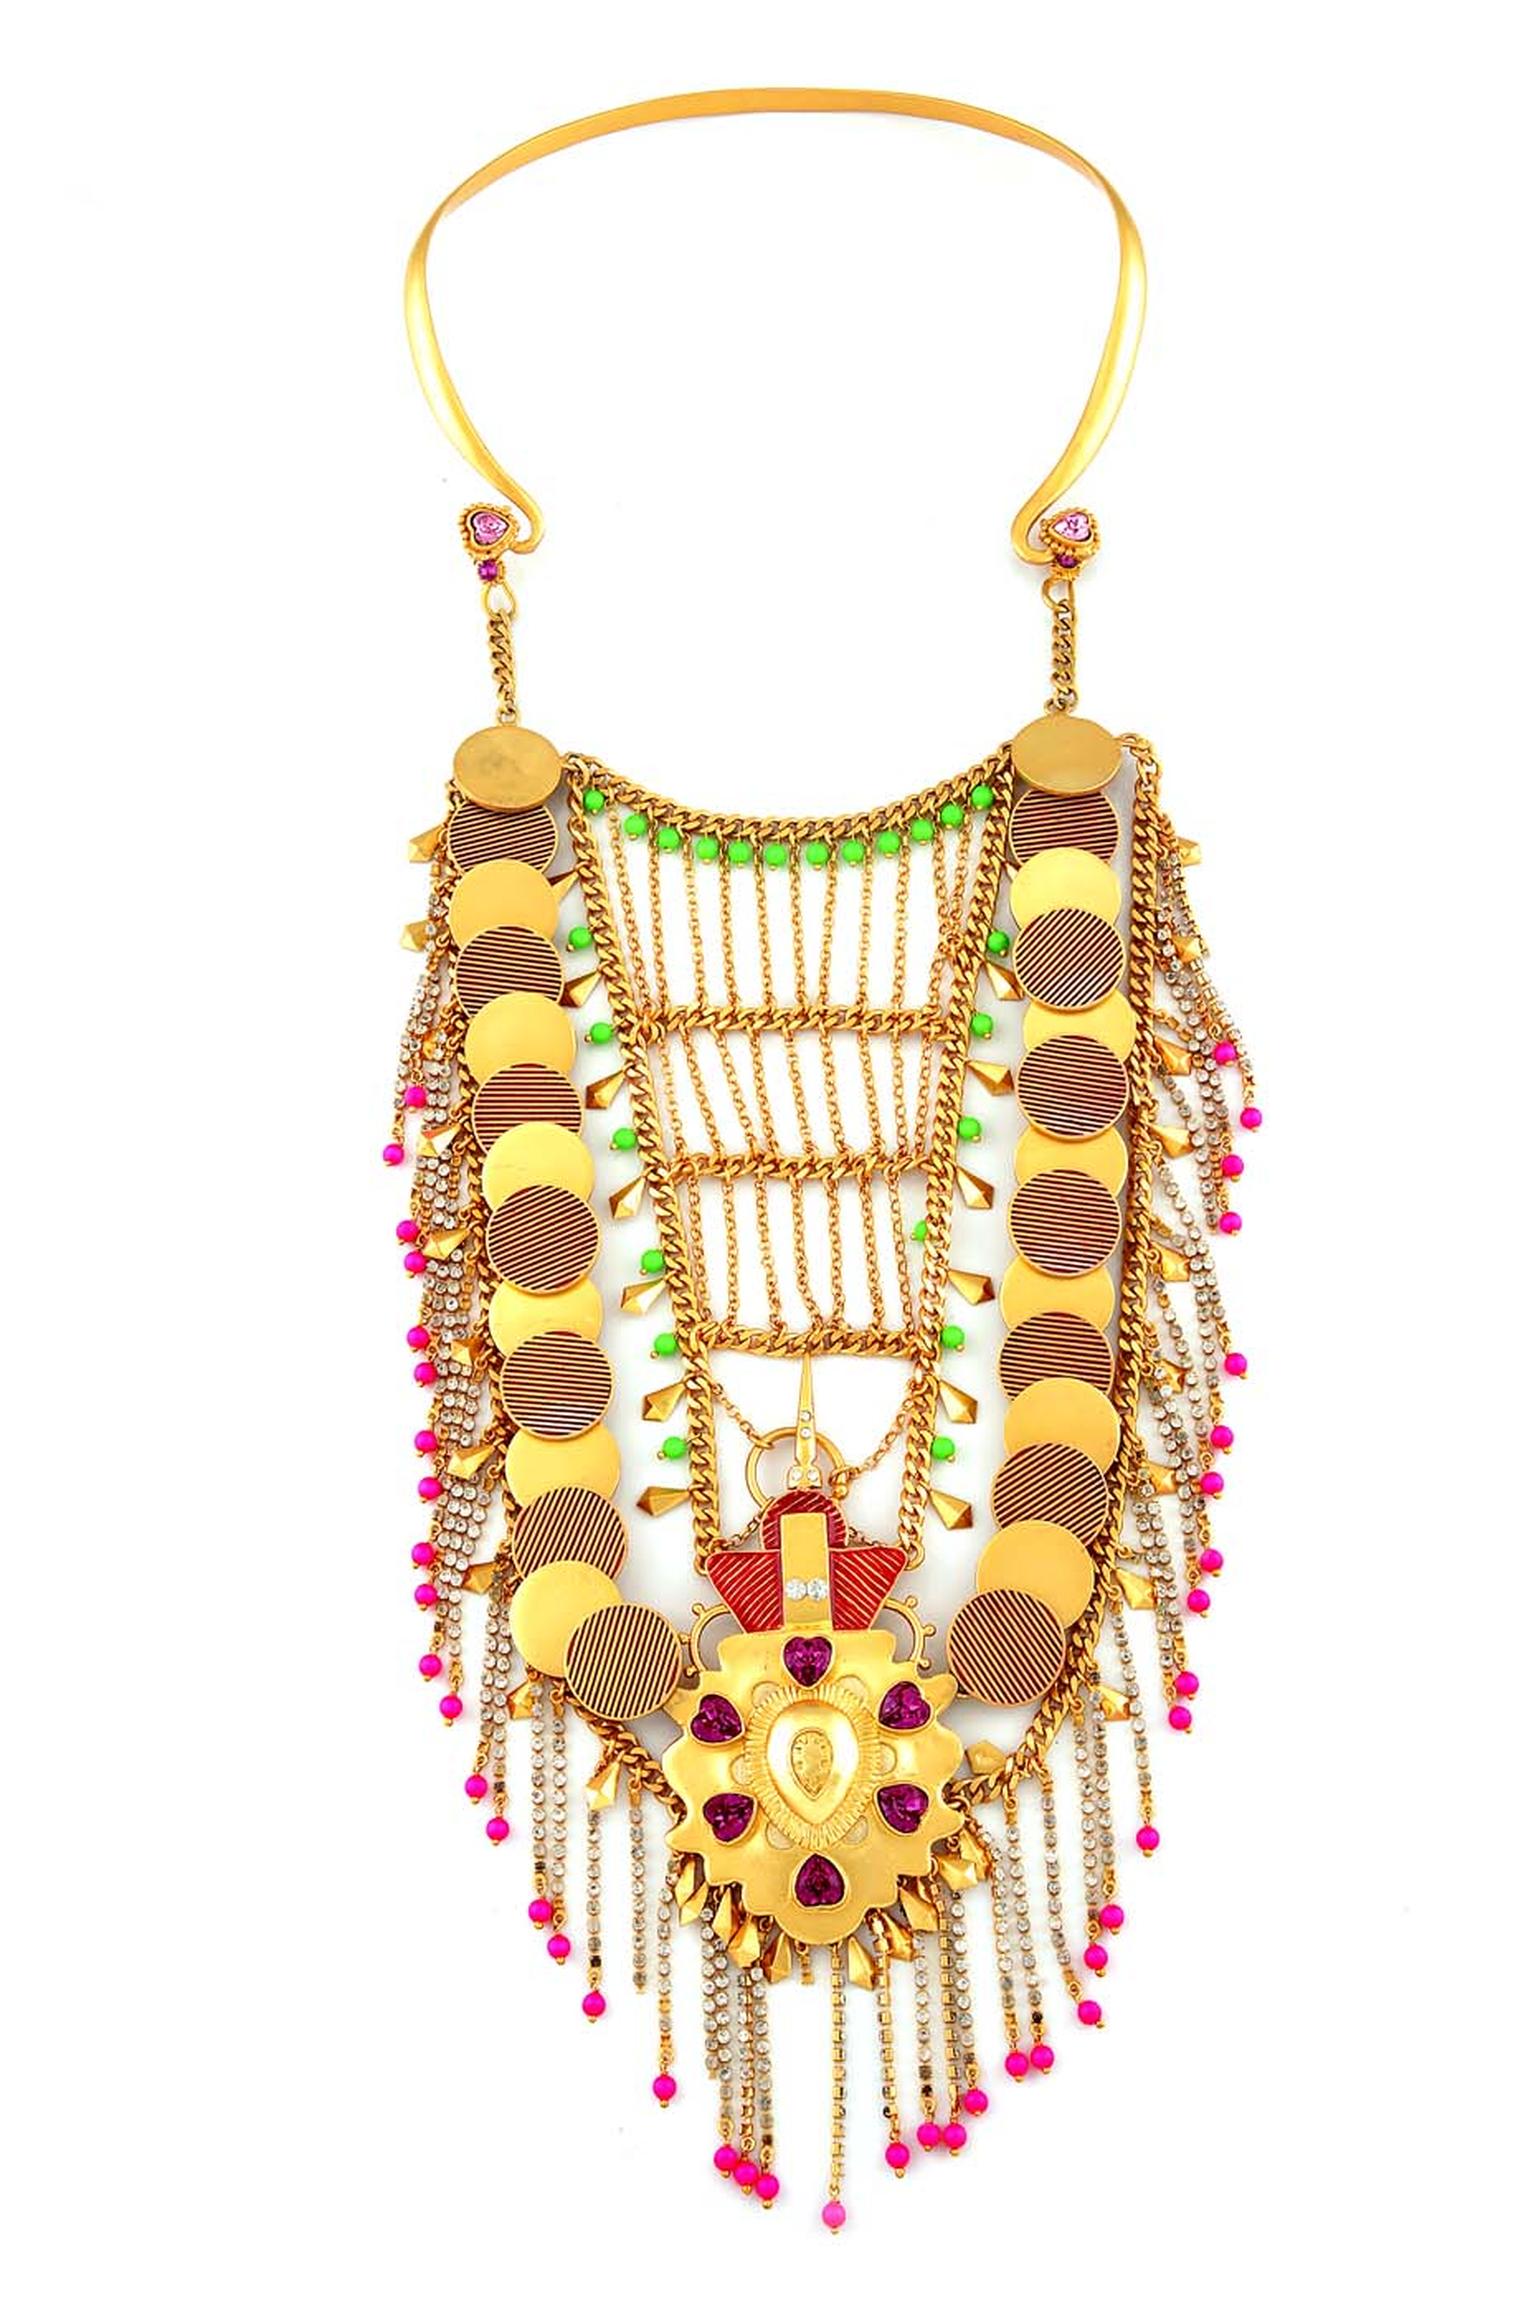 An elaborate Enta necklace with coins, hearts and other colourful motifs from Amrapali and Manish Arora's latest collaboration.